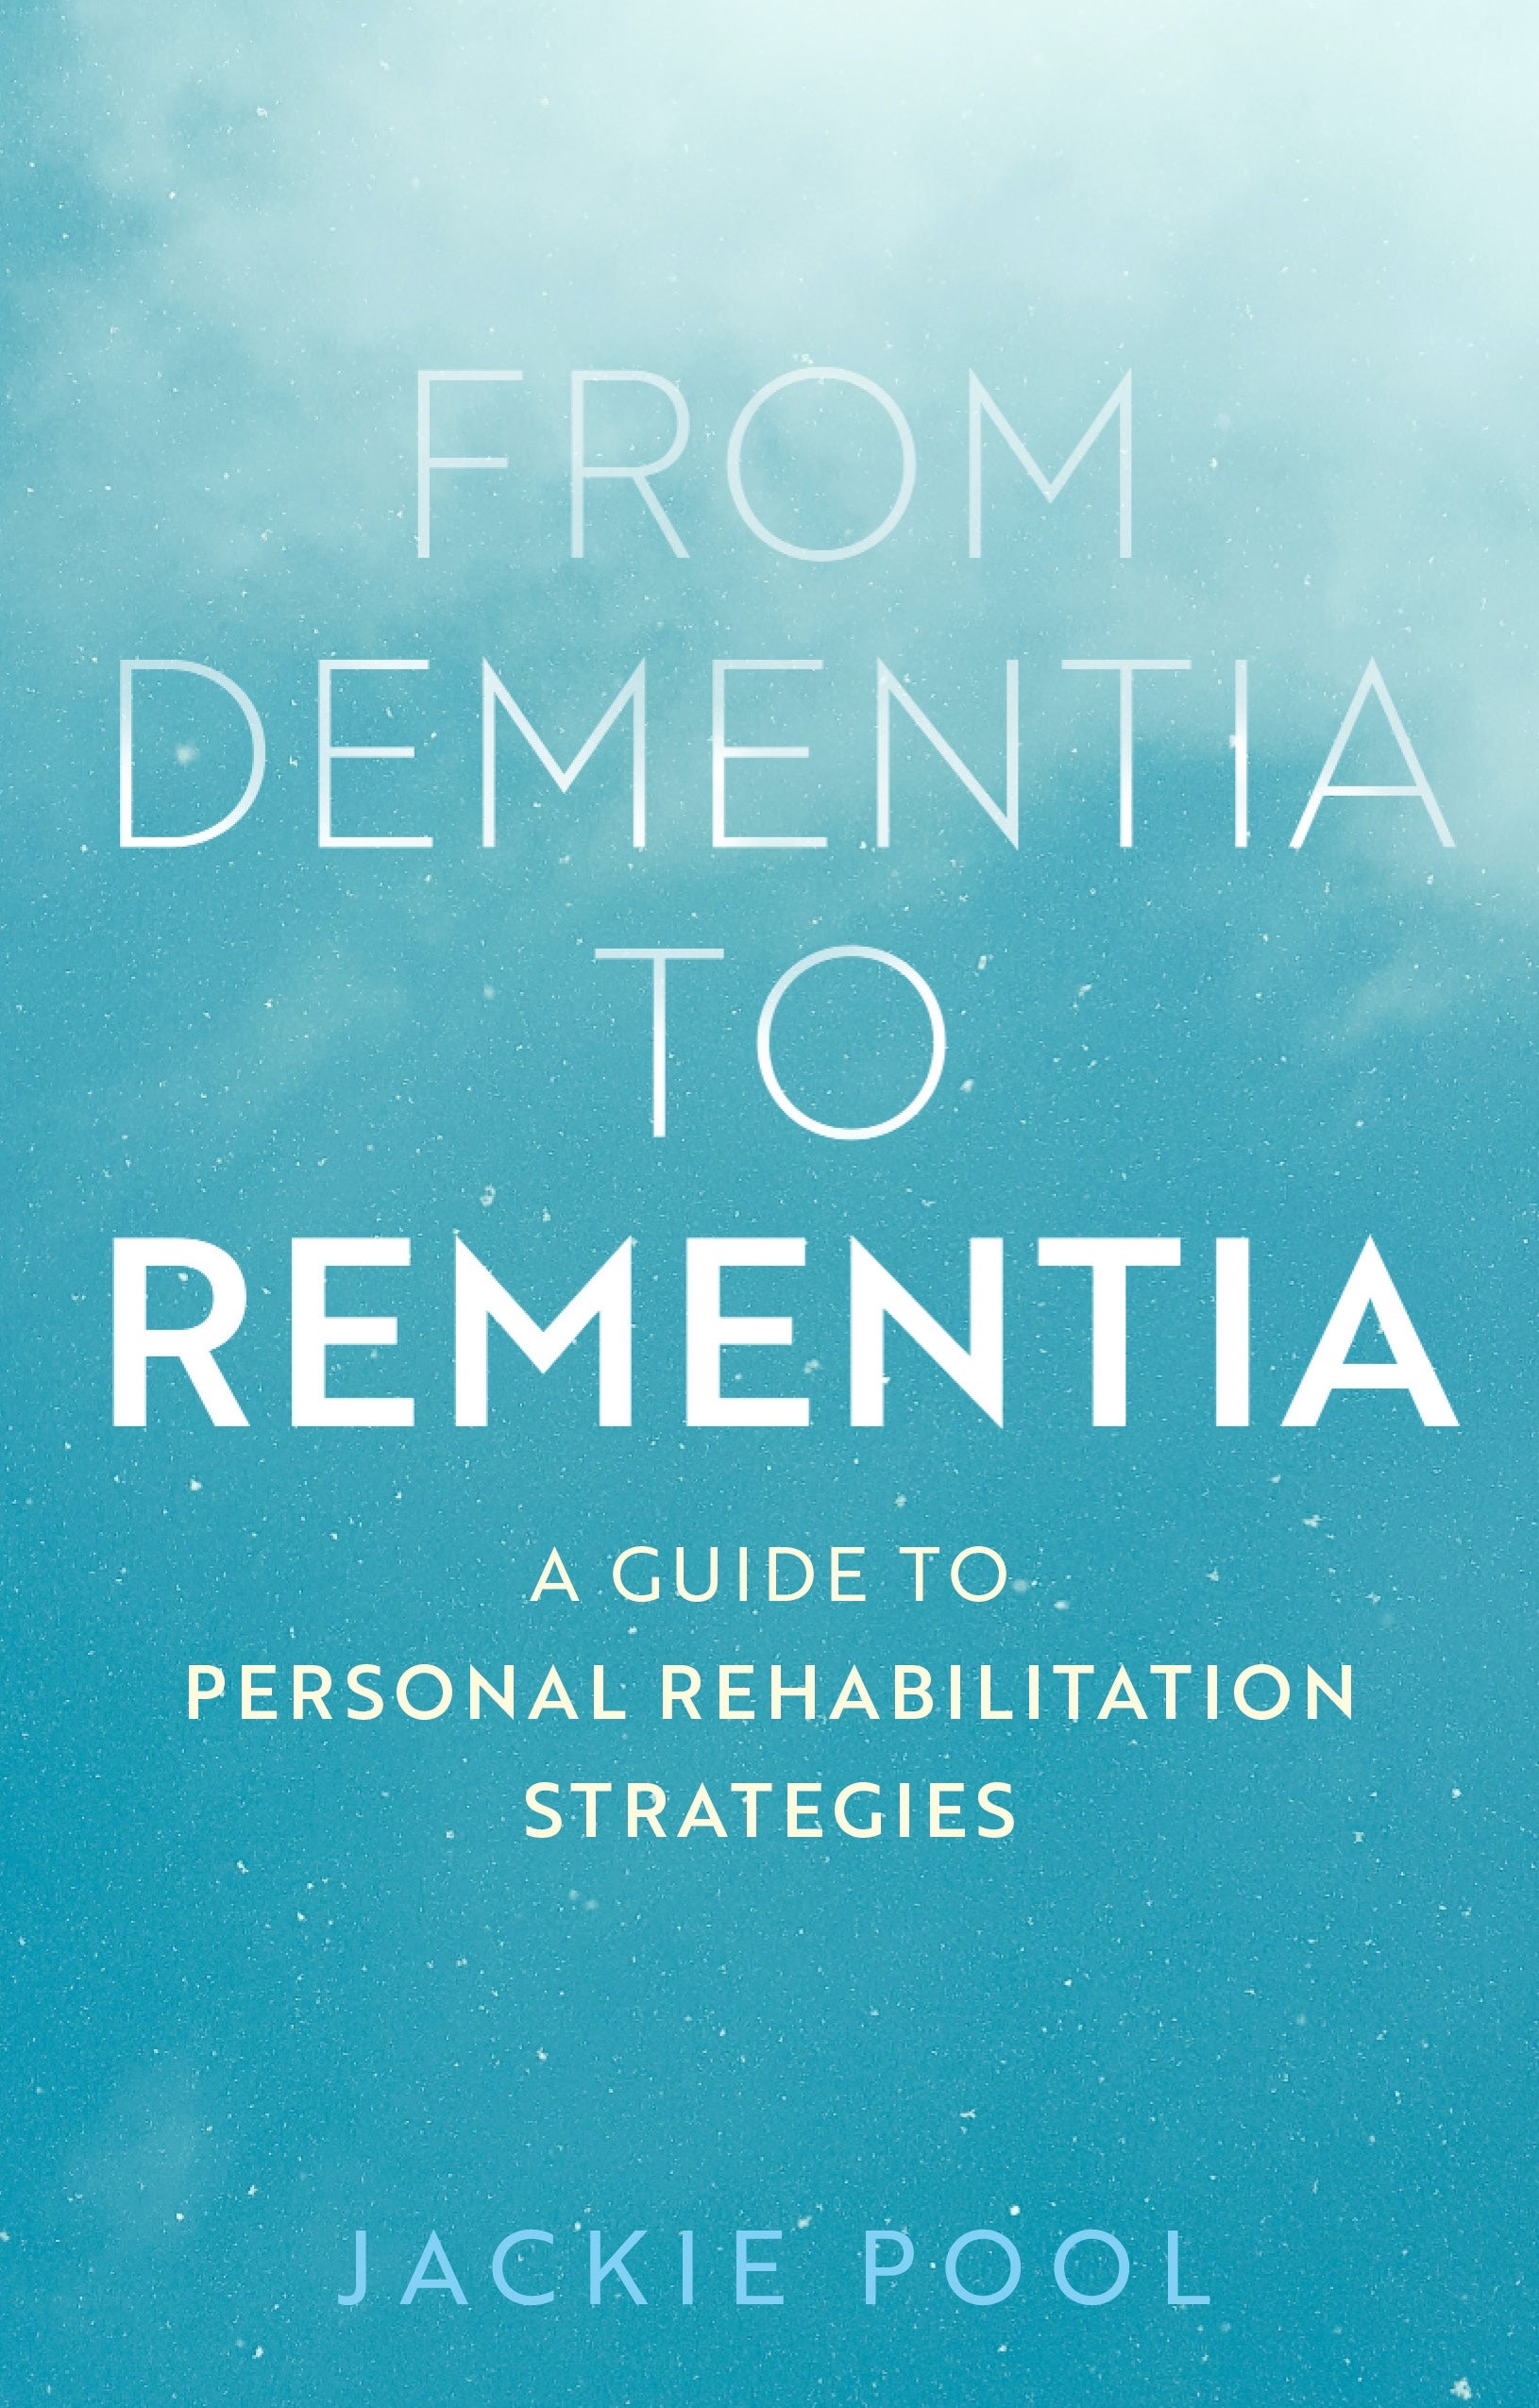 From Dementia to Rementia by Jackie Pool